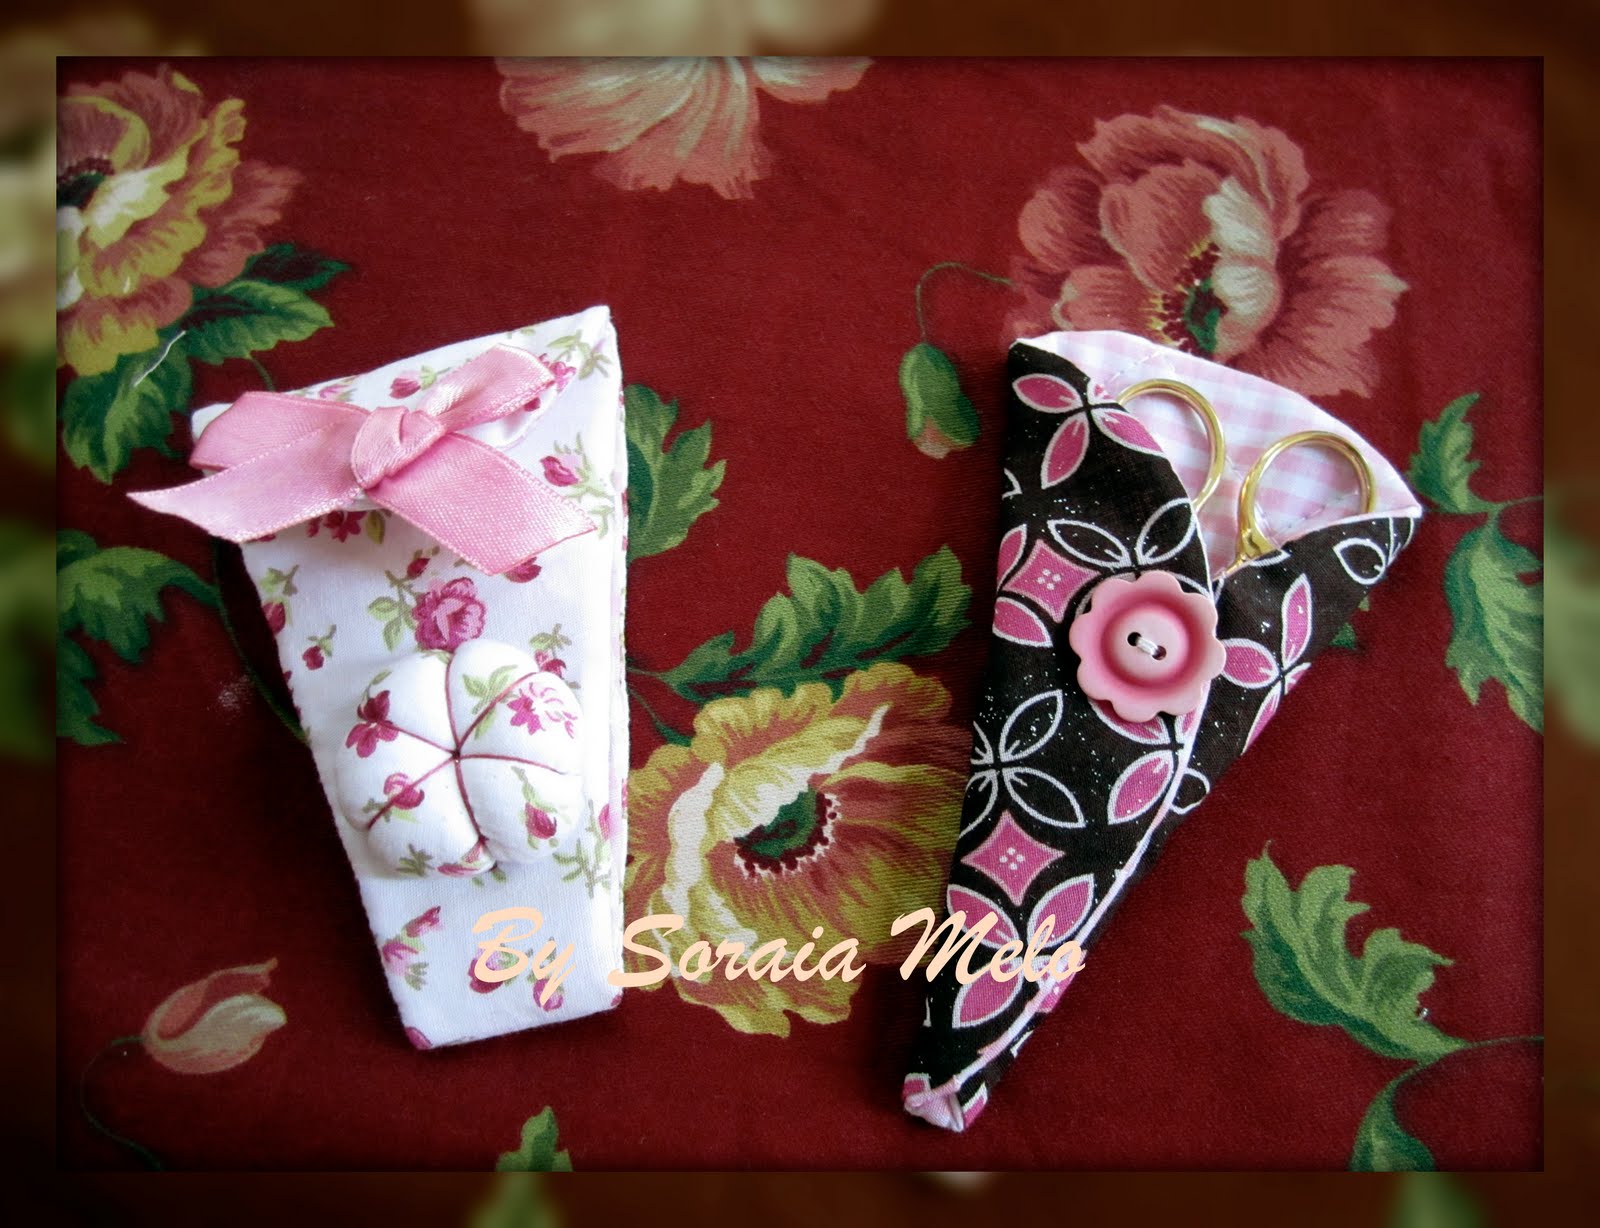 two pieces of fabric with flower patterns and pink bows